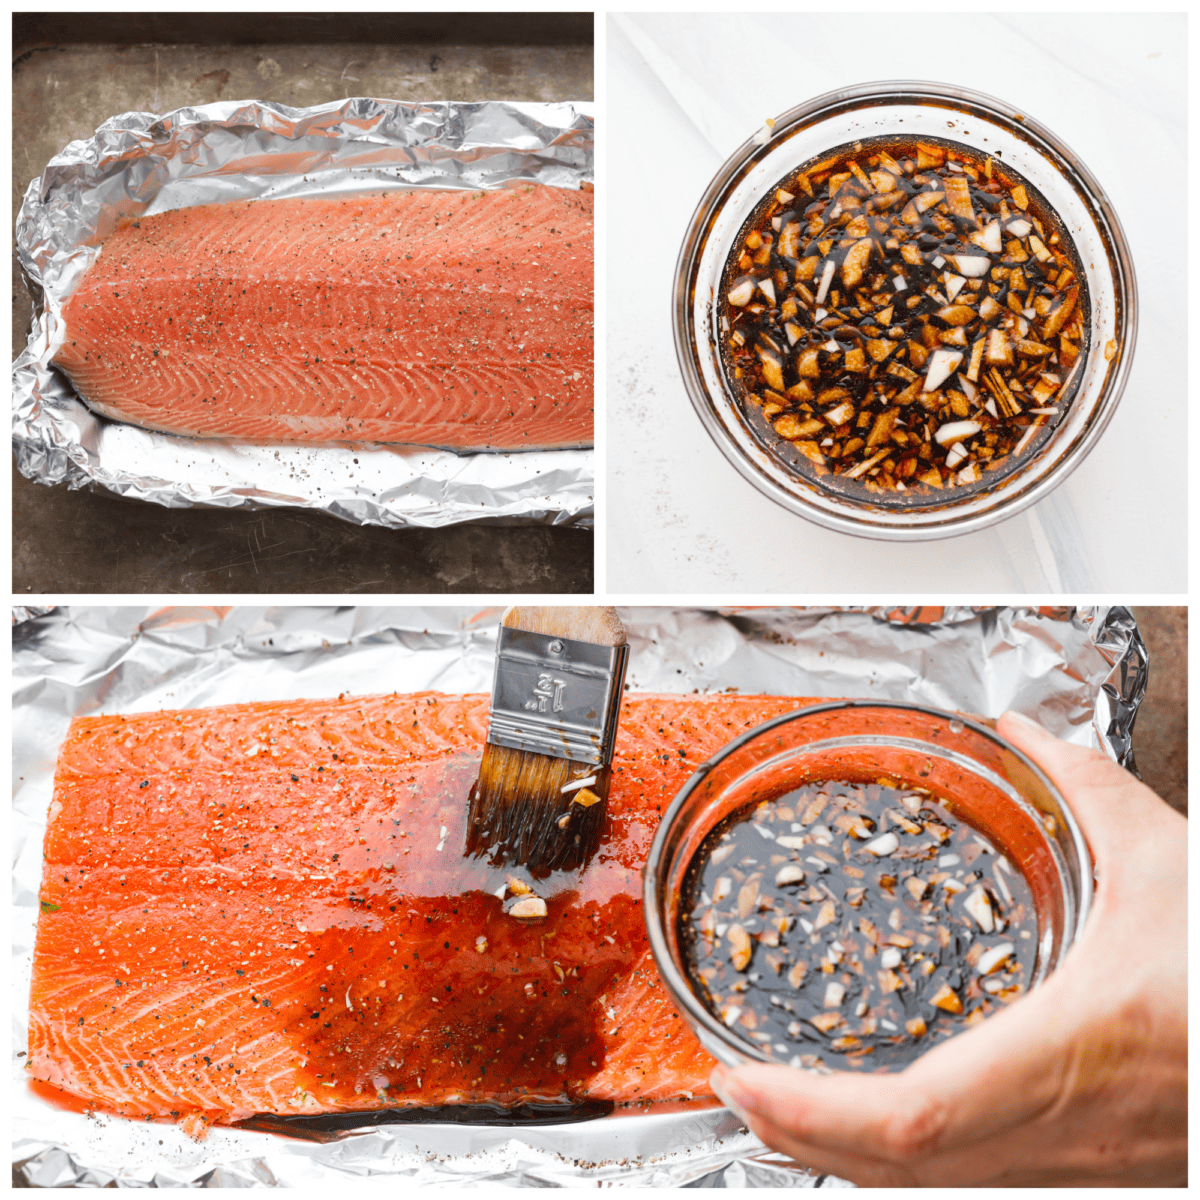 3 photos showing how to baste the salmon with the garlic brown sugar glaze. 